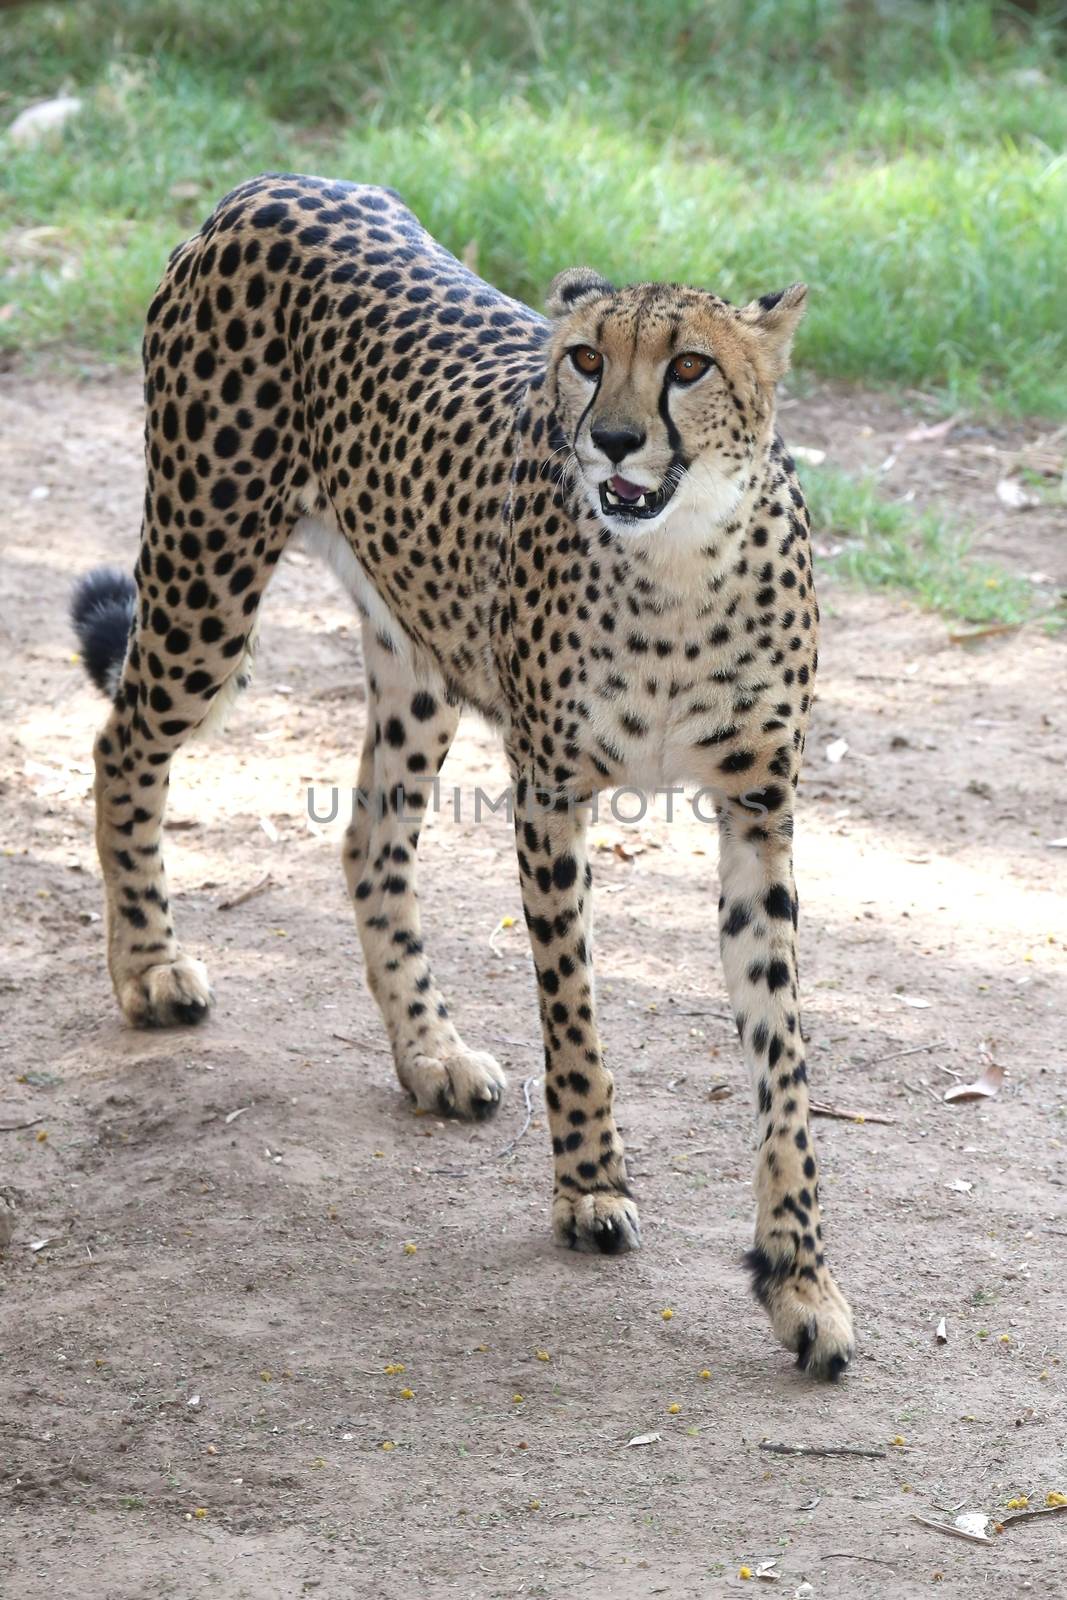 Cheetah wild cat with spotted fur and long legs